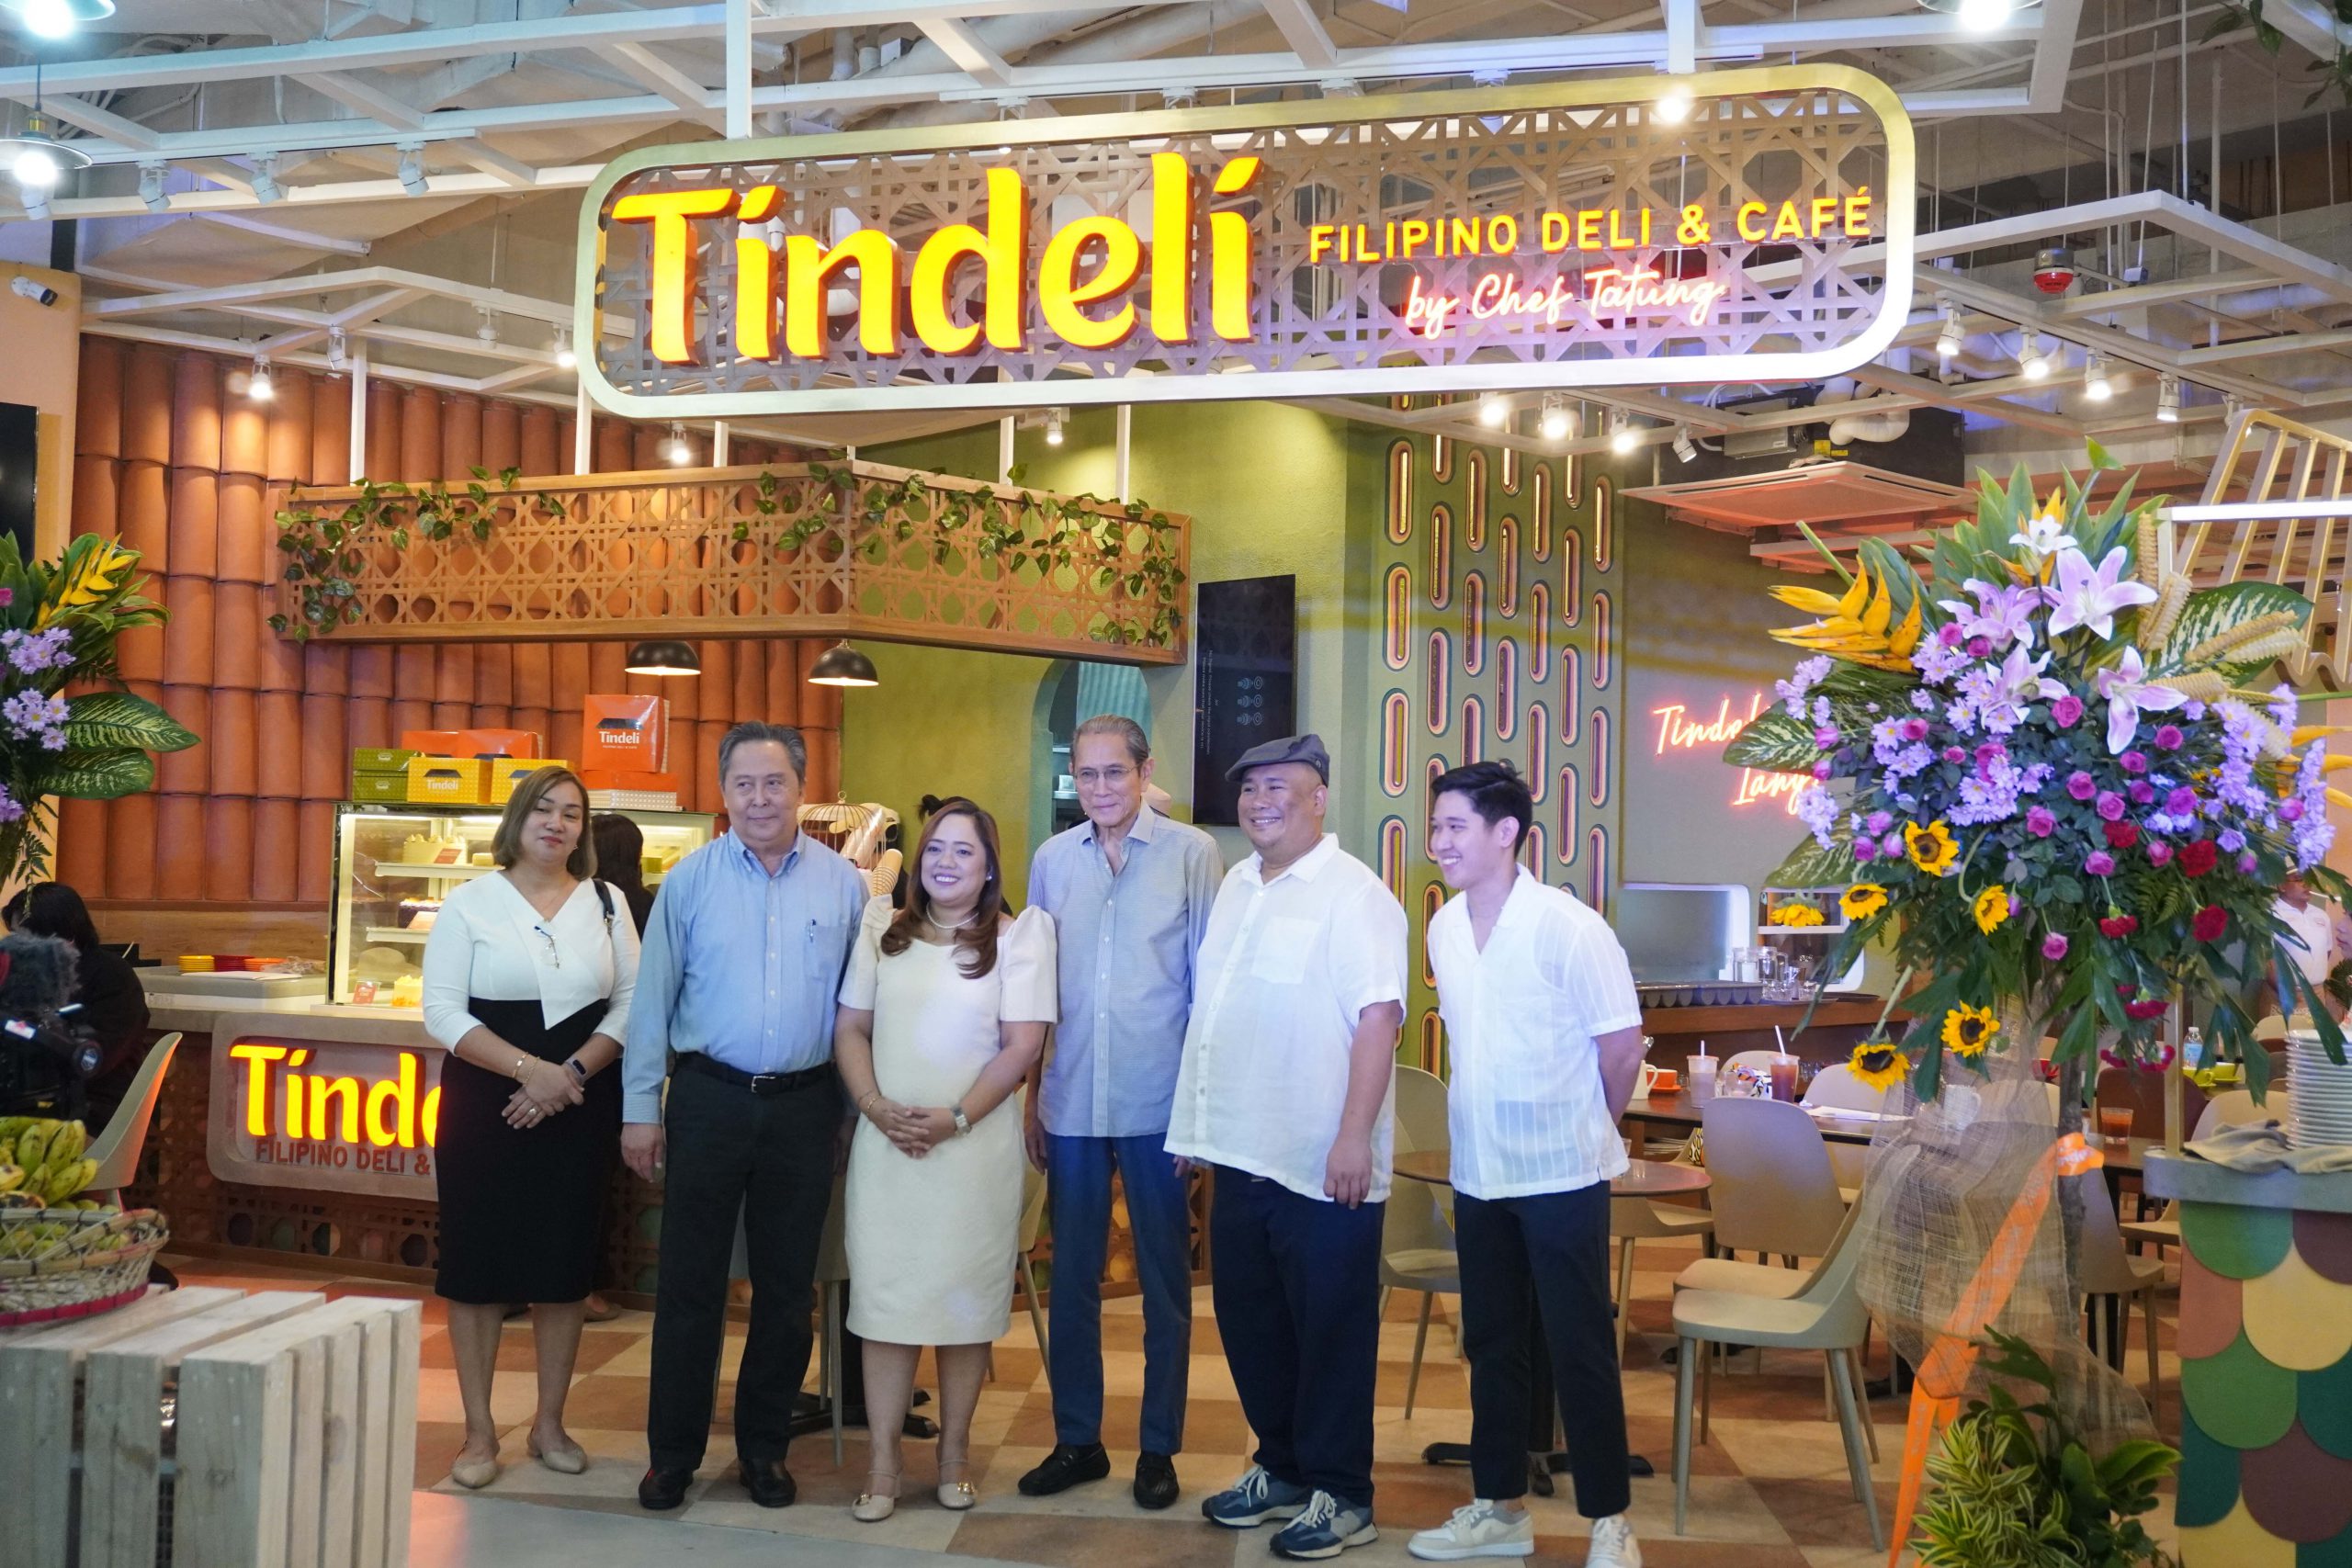 Tindeli, the first tindahan-deli resto, opens at the City of Firsts